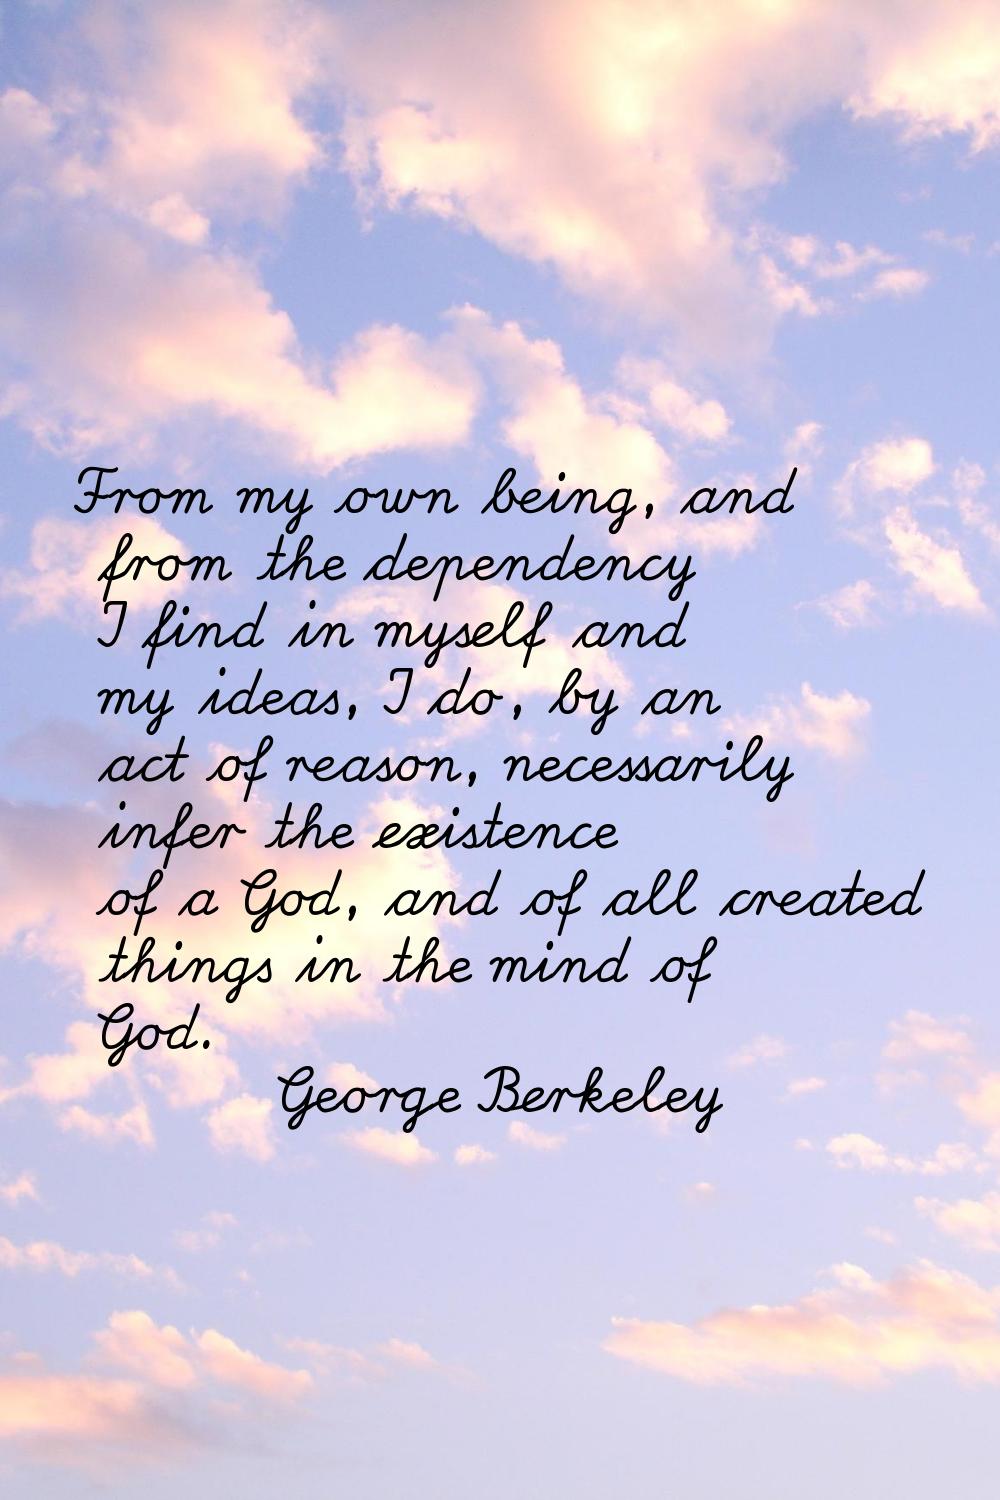 From my own being, and from the dependency I find in myself and my ideas, I do, by an act of reason